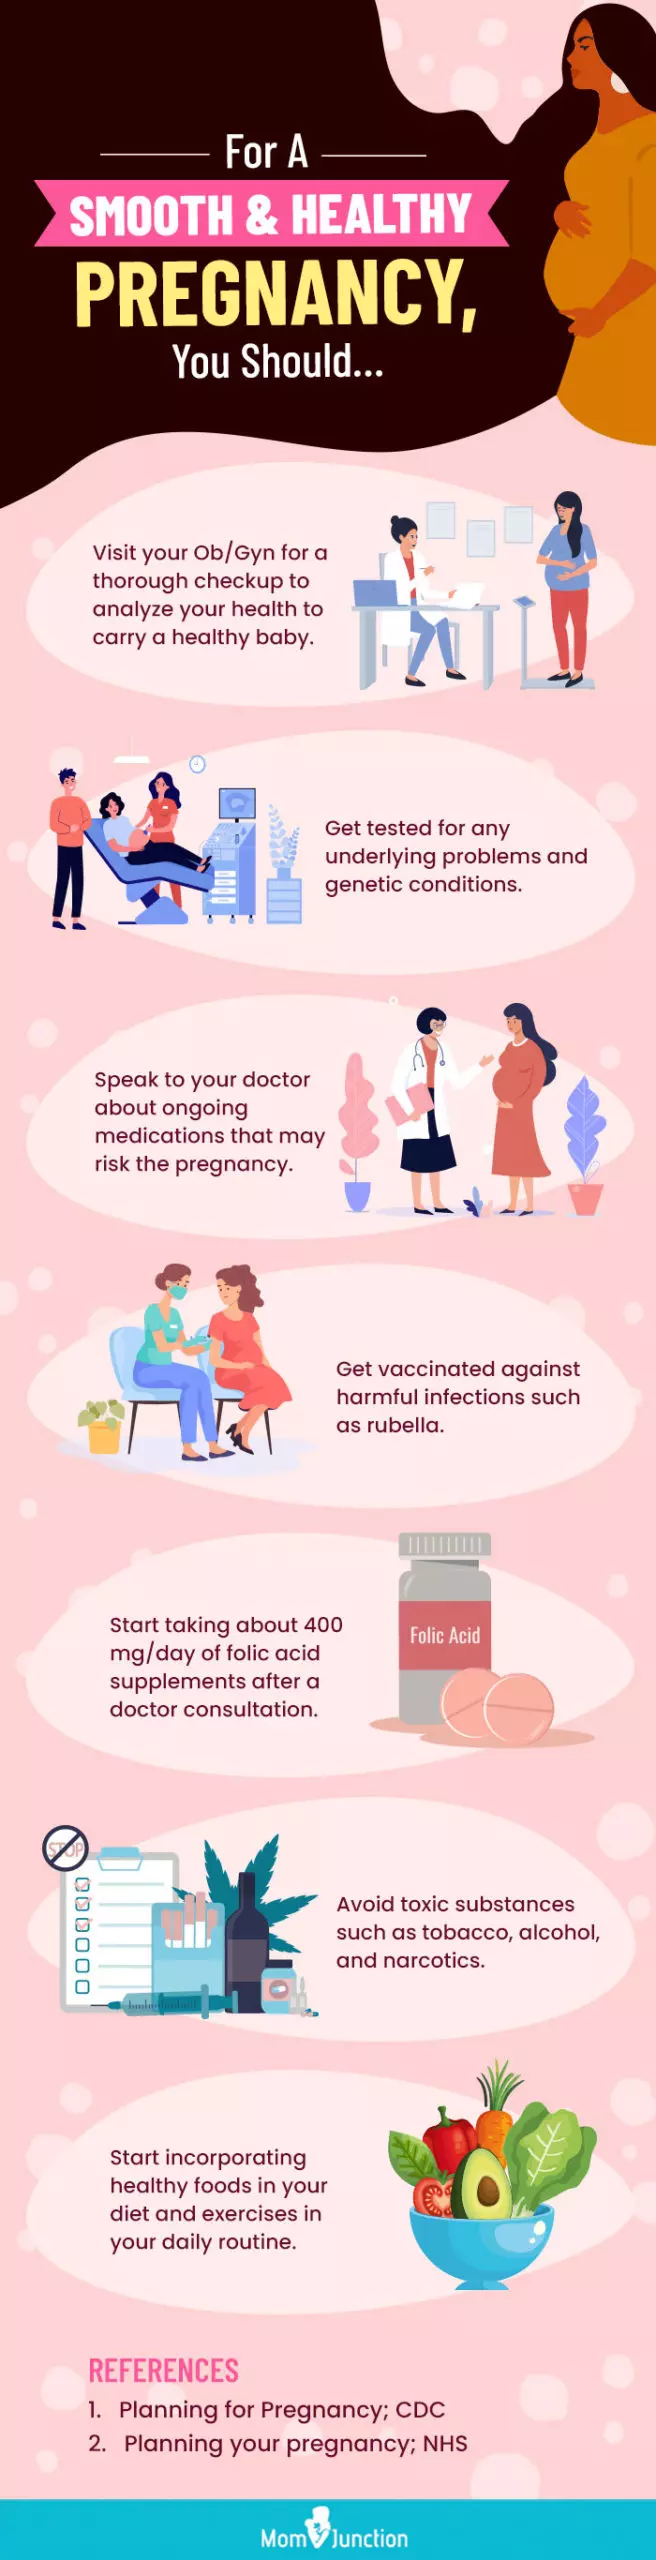 things you must do while planning your pregnancy (infographic)